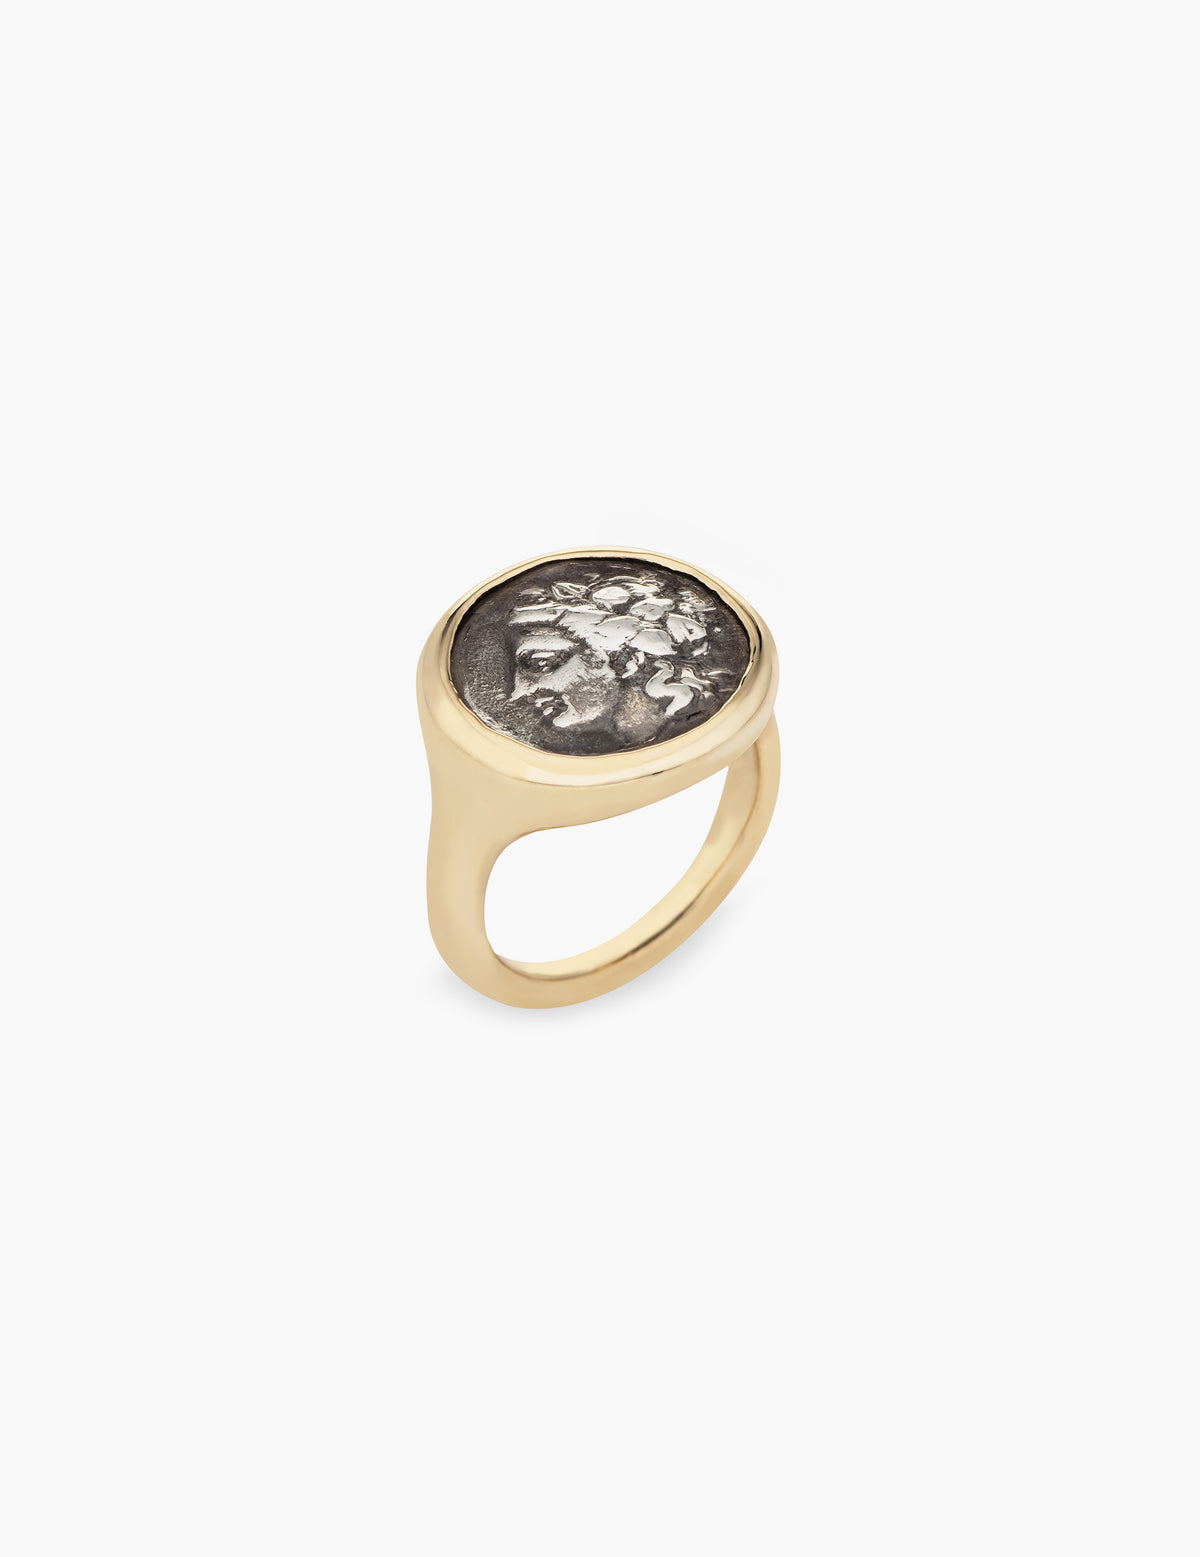 Dionysus Ring in Gold and Sterling Silver